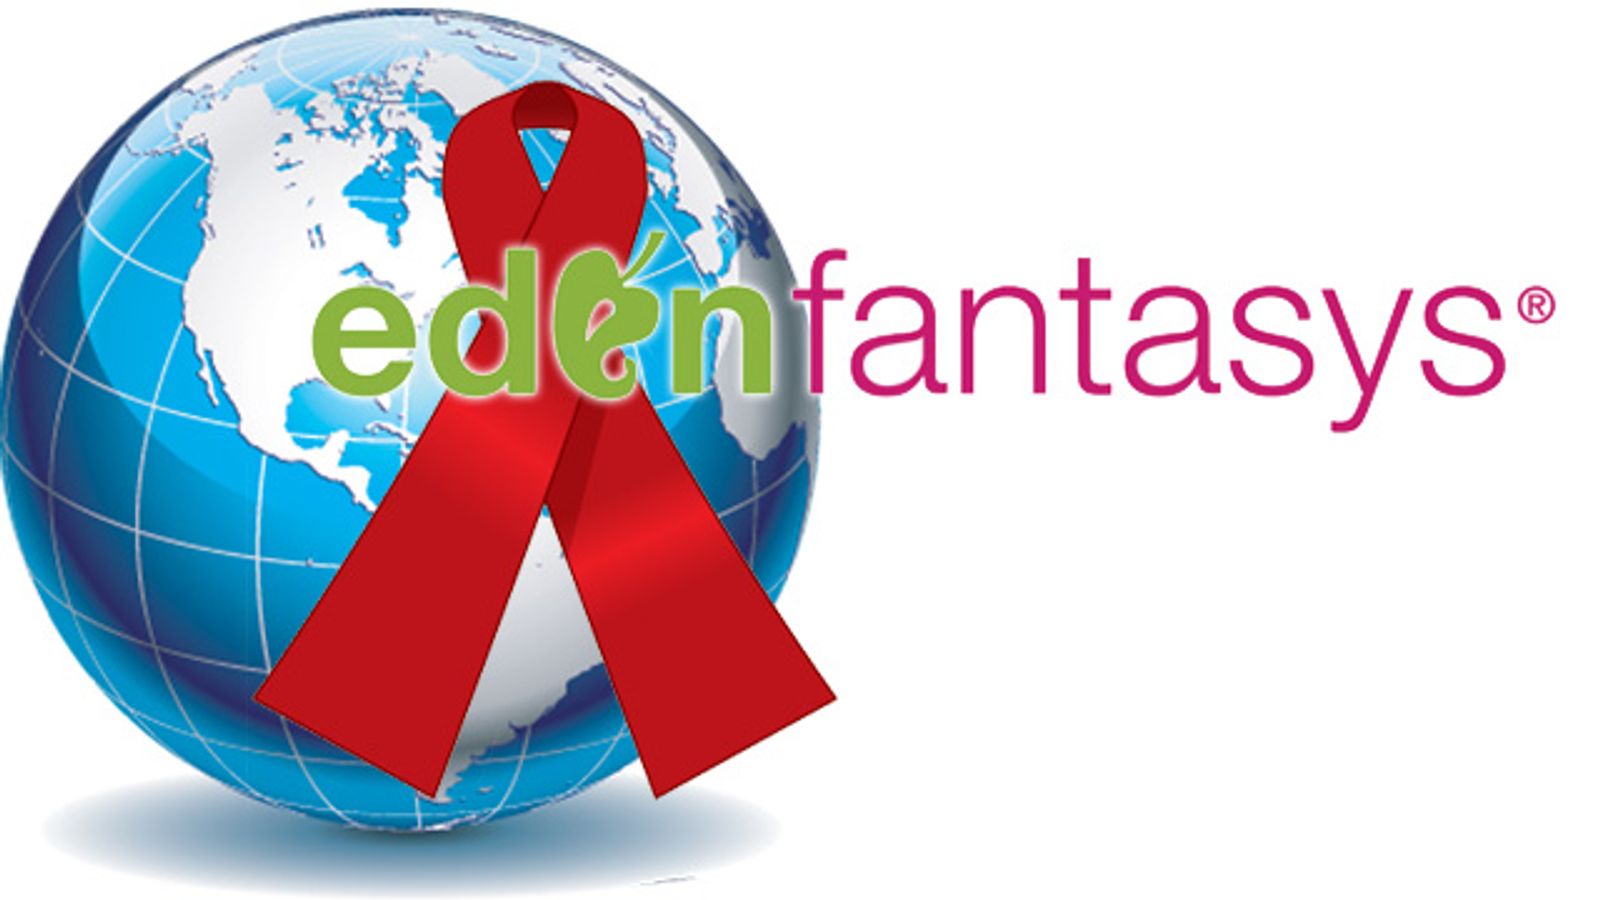 Eden Fantasys Takes on World AIDS Day for a Week